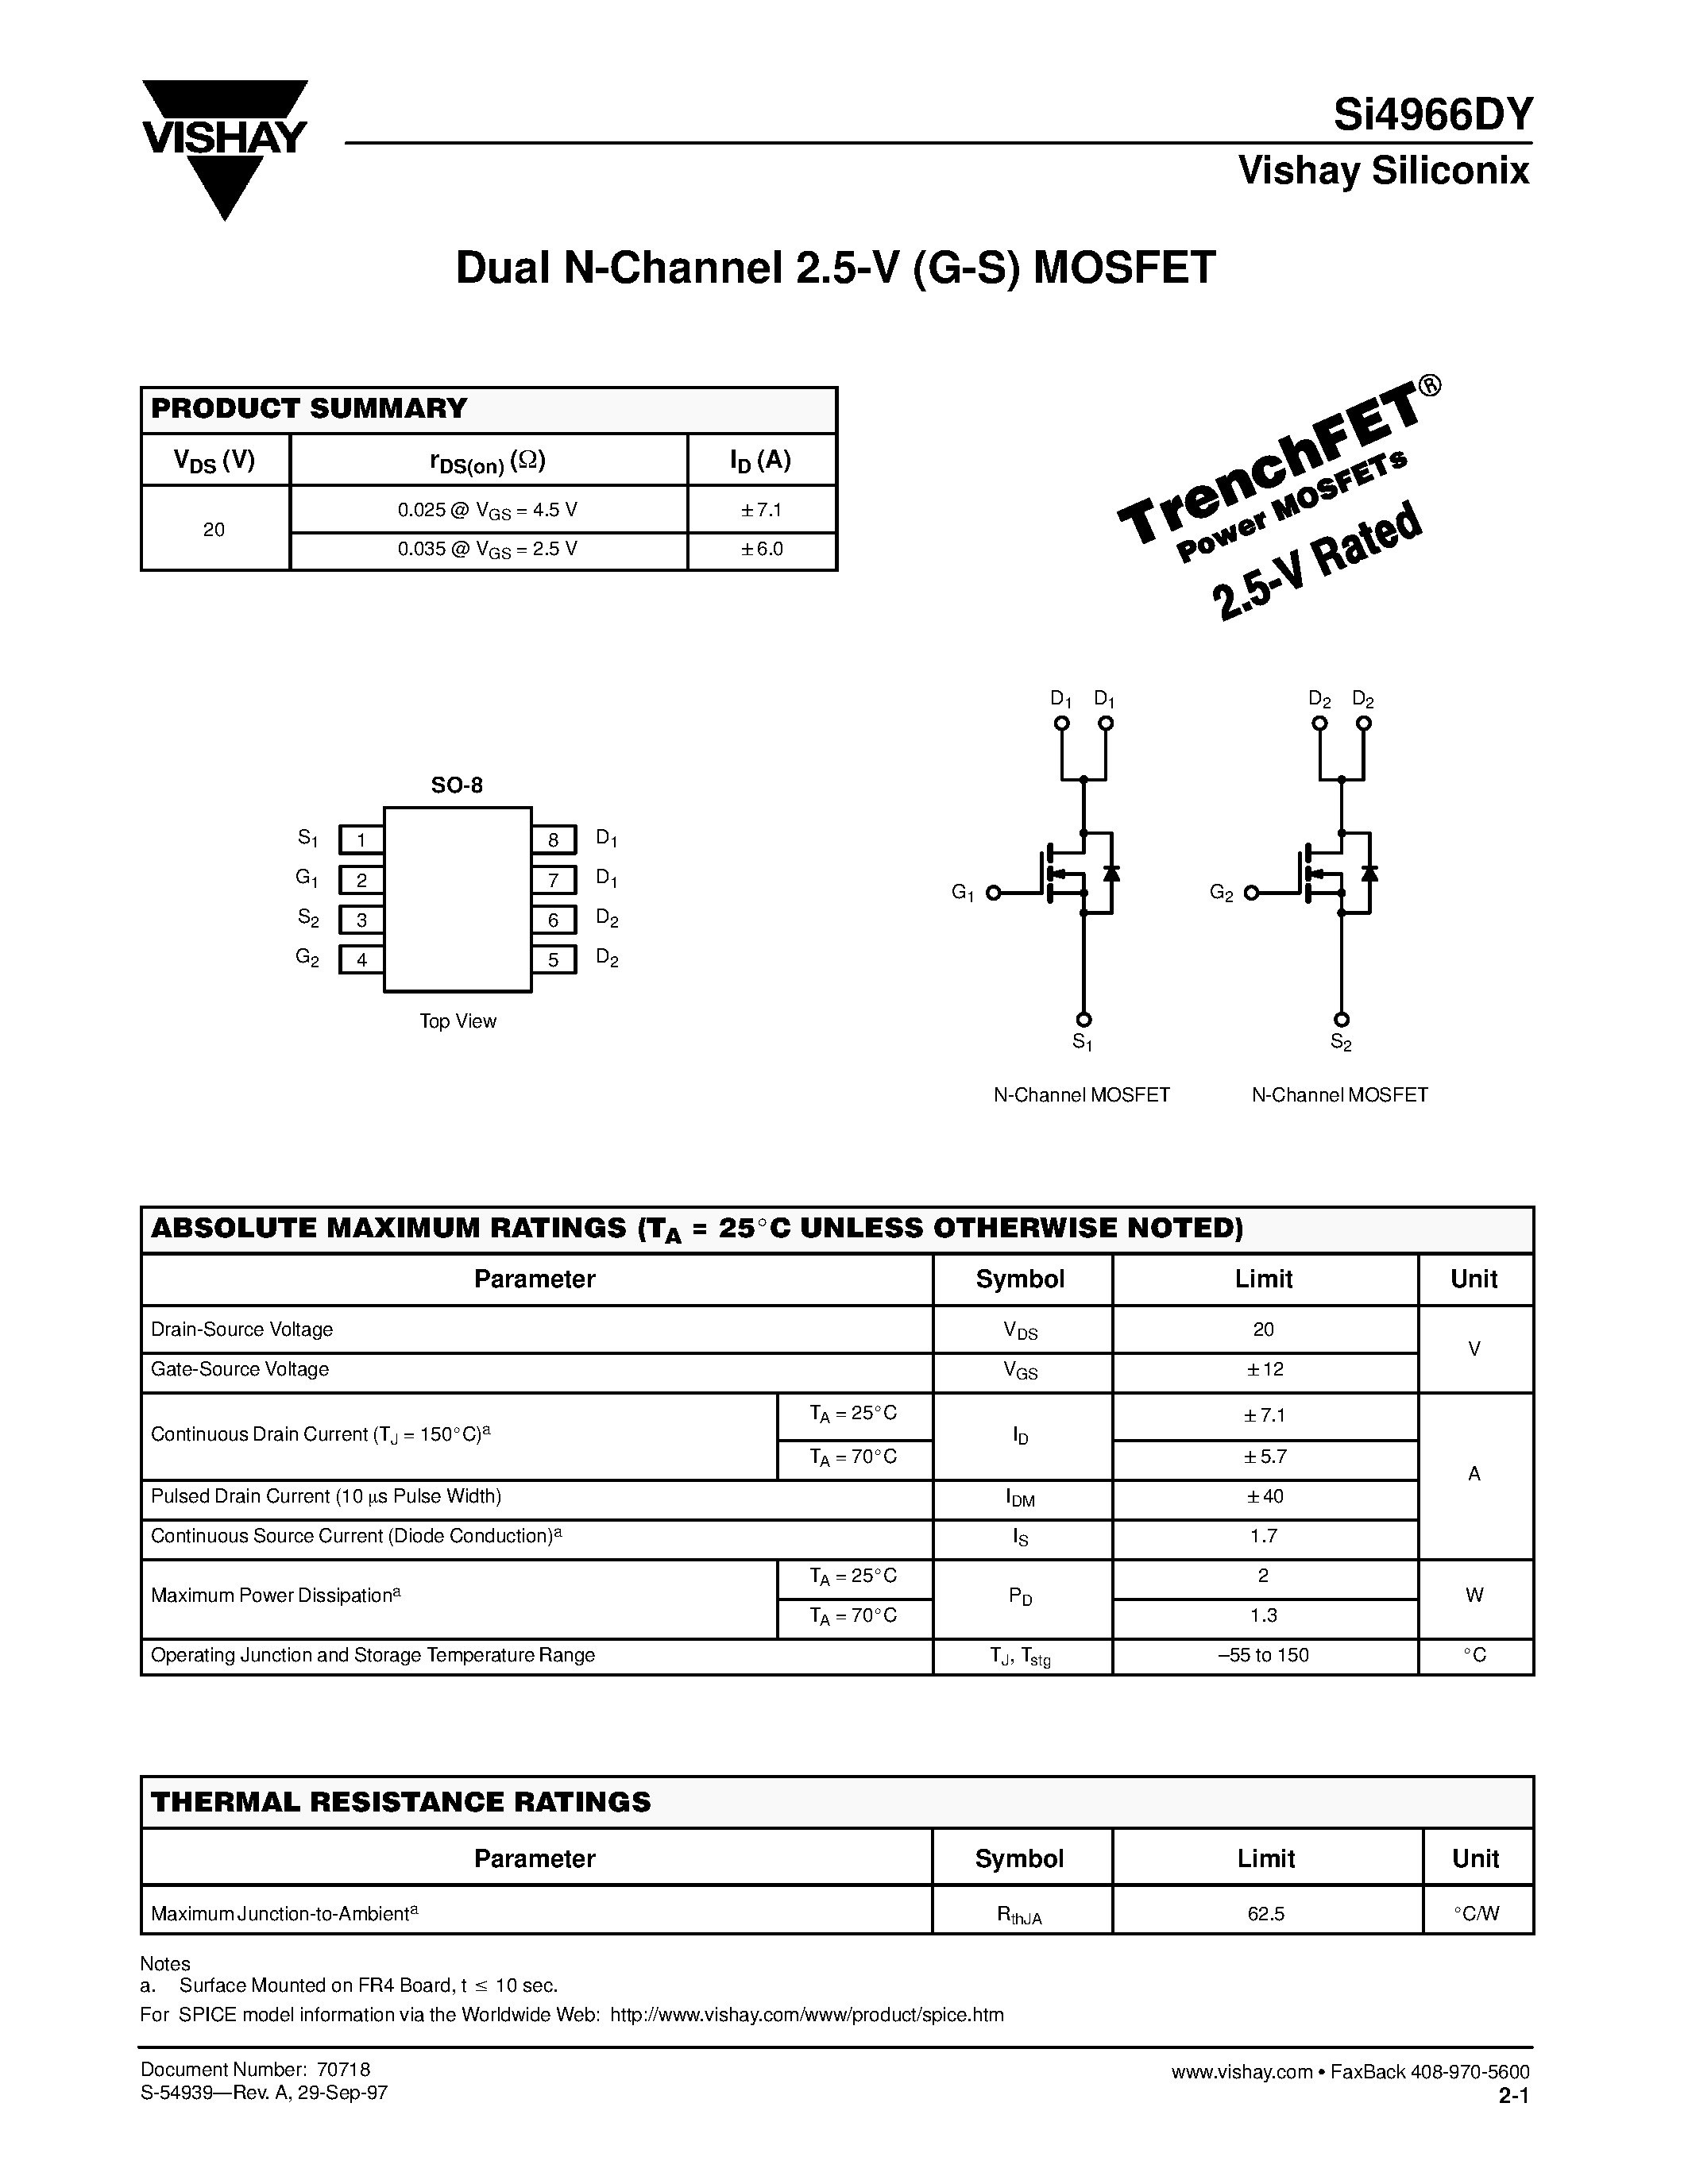 Datasheet SI4966DY - Dual N-Channel 2.5-V (G-S) MOSFET page 1